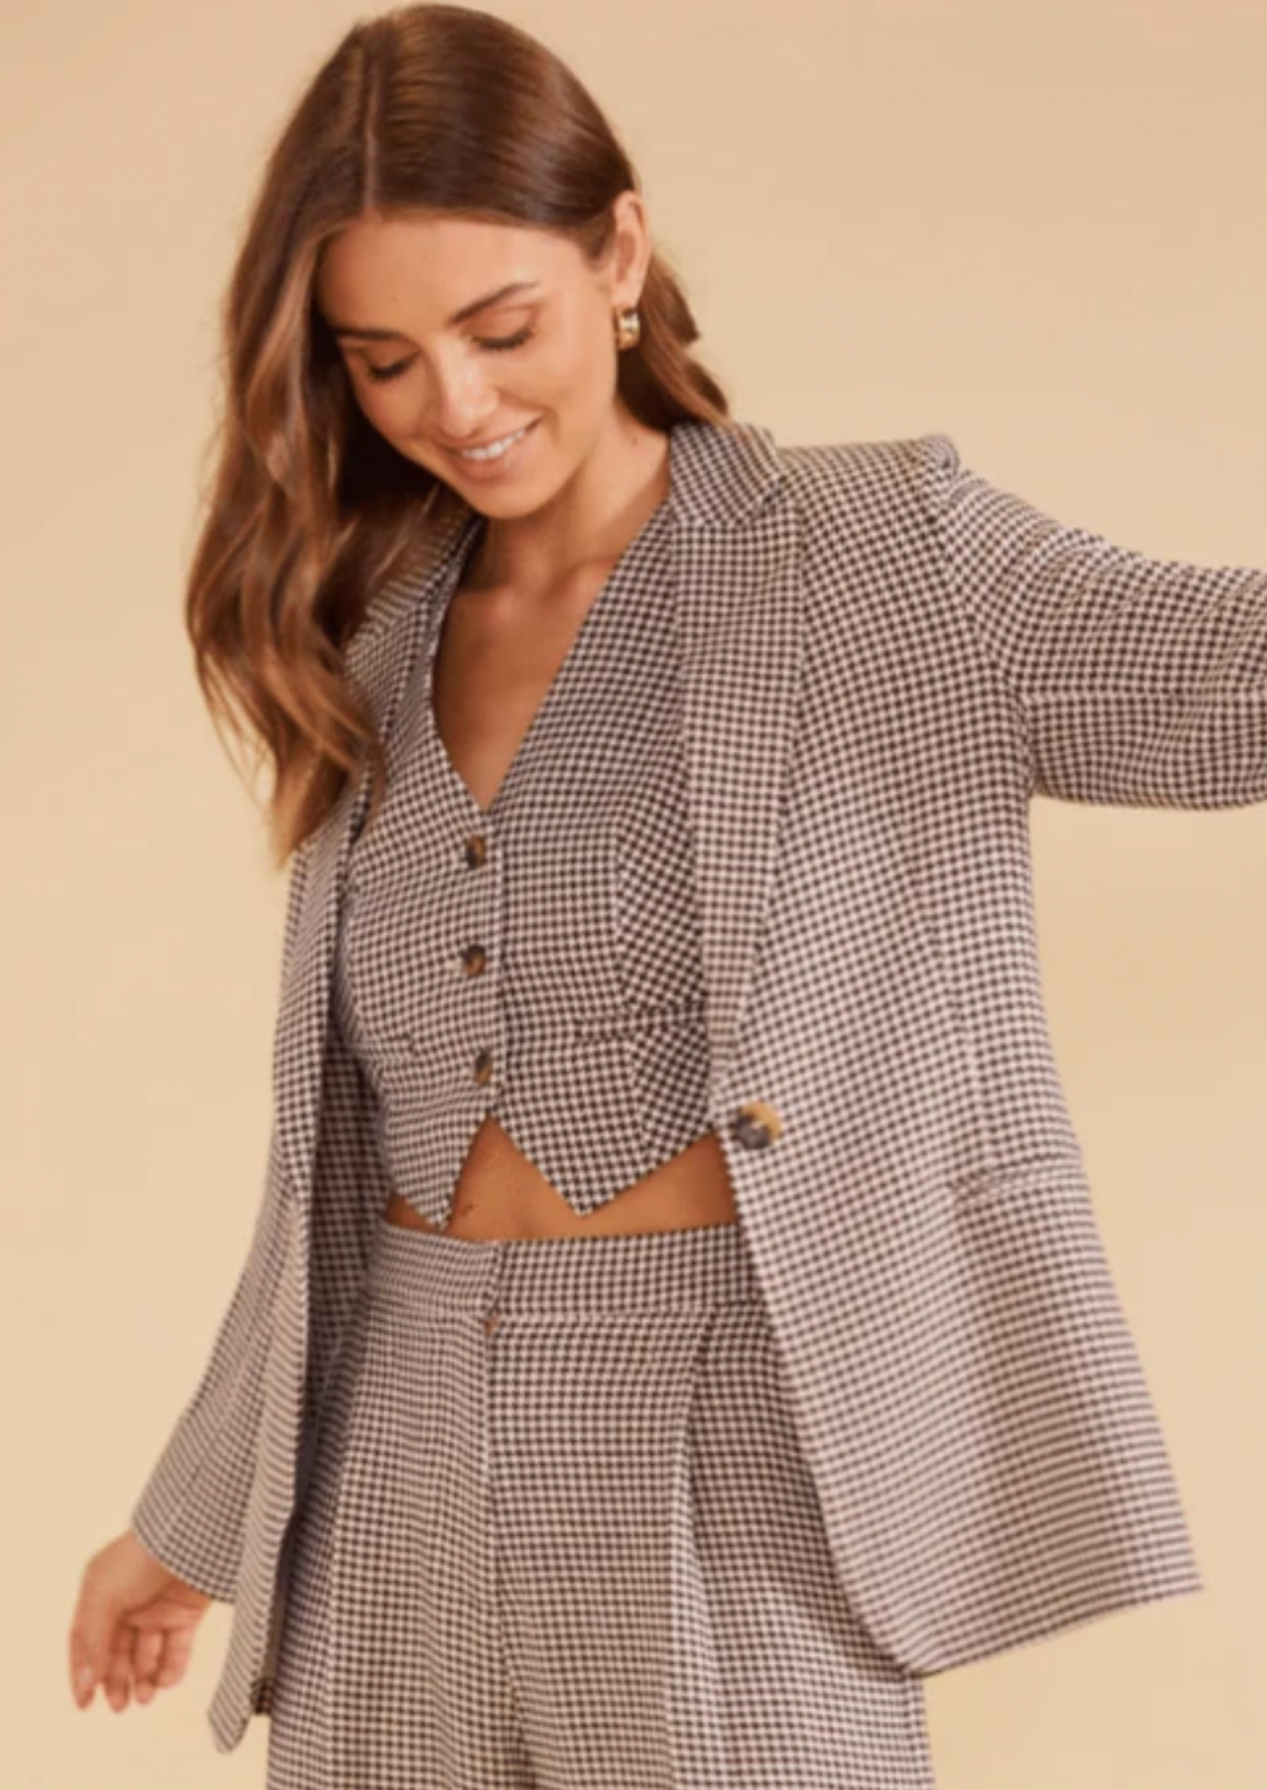 Elena Blazer, By MinkPink Details: - Chocolate brown houndstooth blazer - Single tortoiseshell button closure - Full-length sleeves with two-button cuffs - Notched lapels - Lined - Centre back vent - Relaxed fit